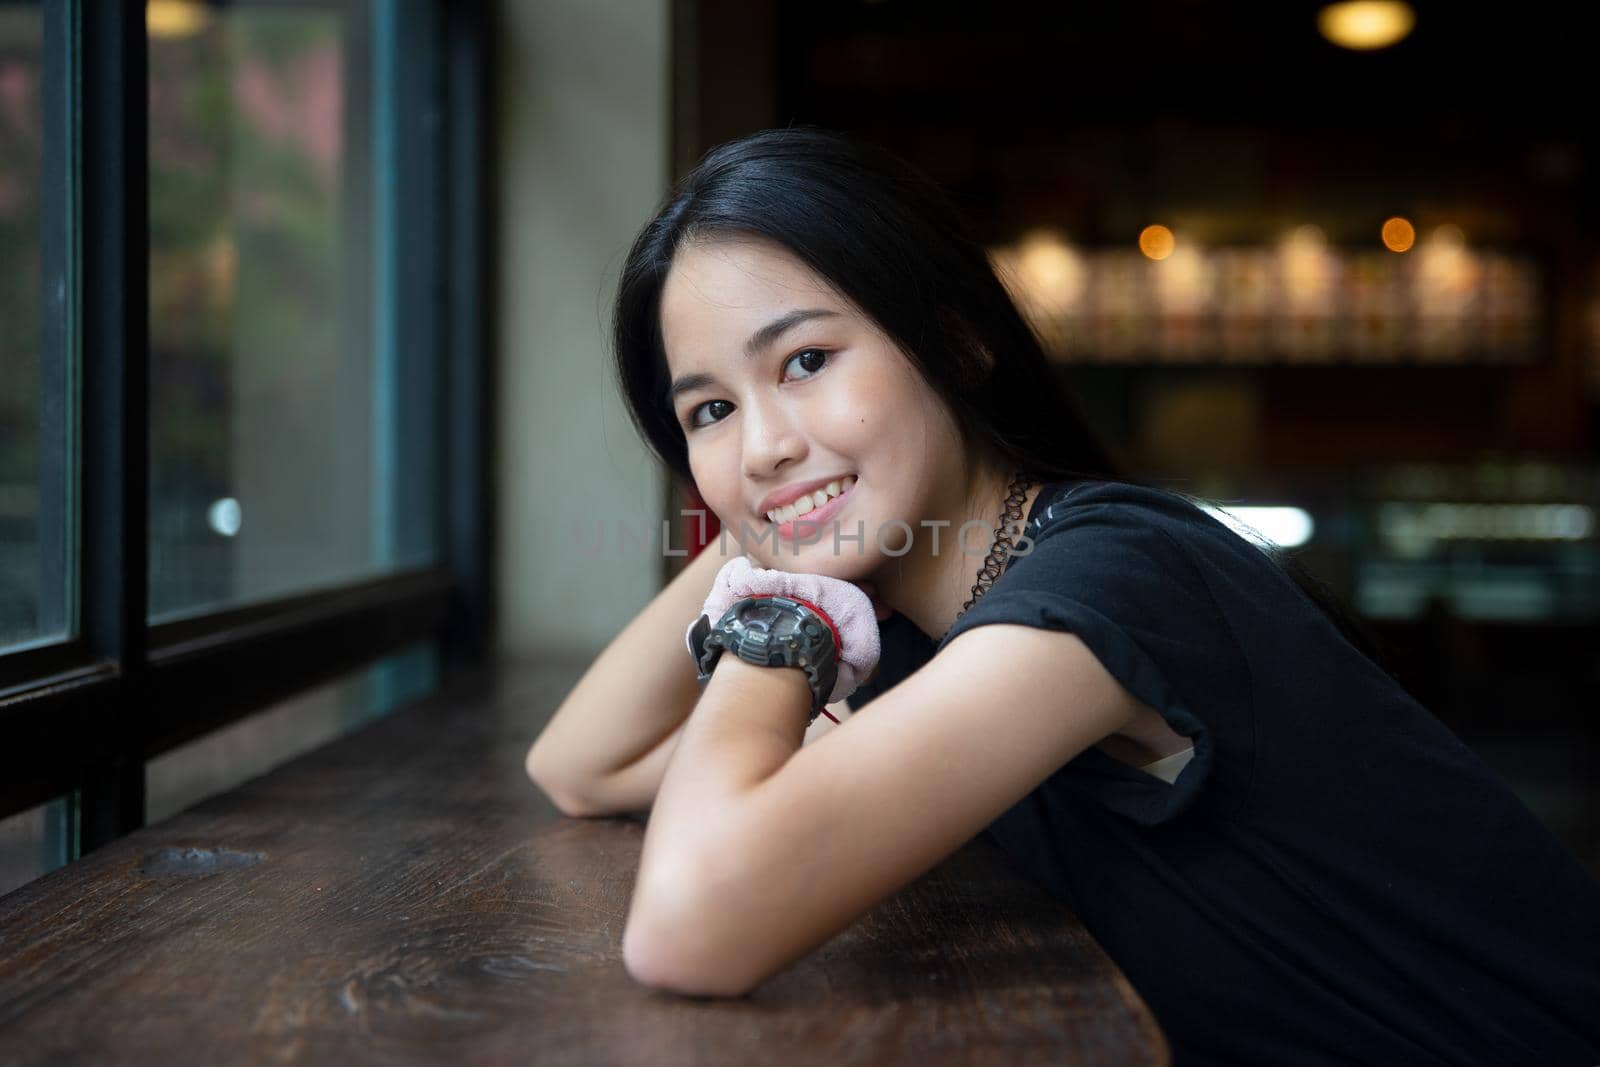 portrait of young charming beautiful girl with smile, authentic moments of real emotion. by chuanchai